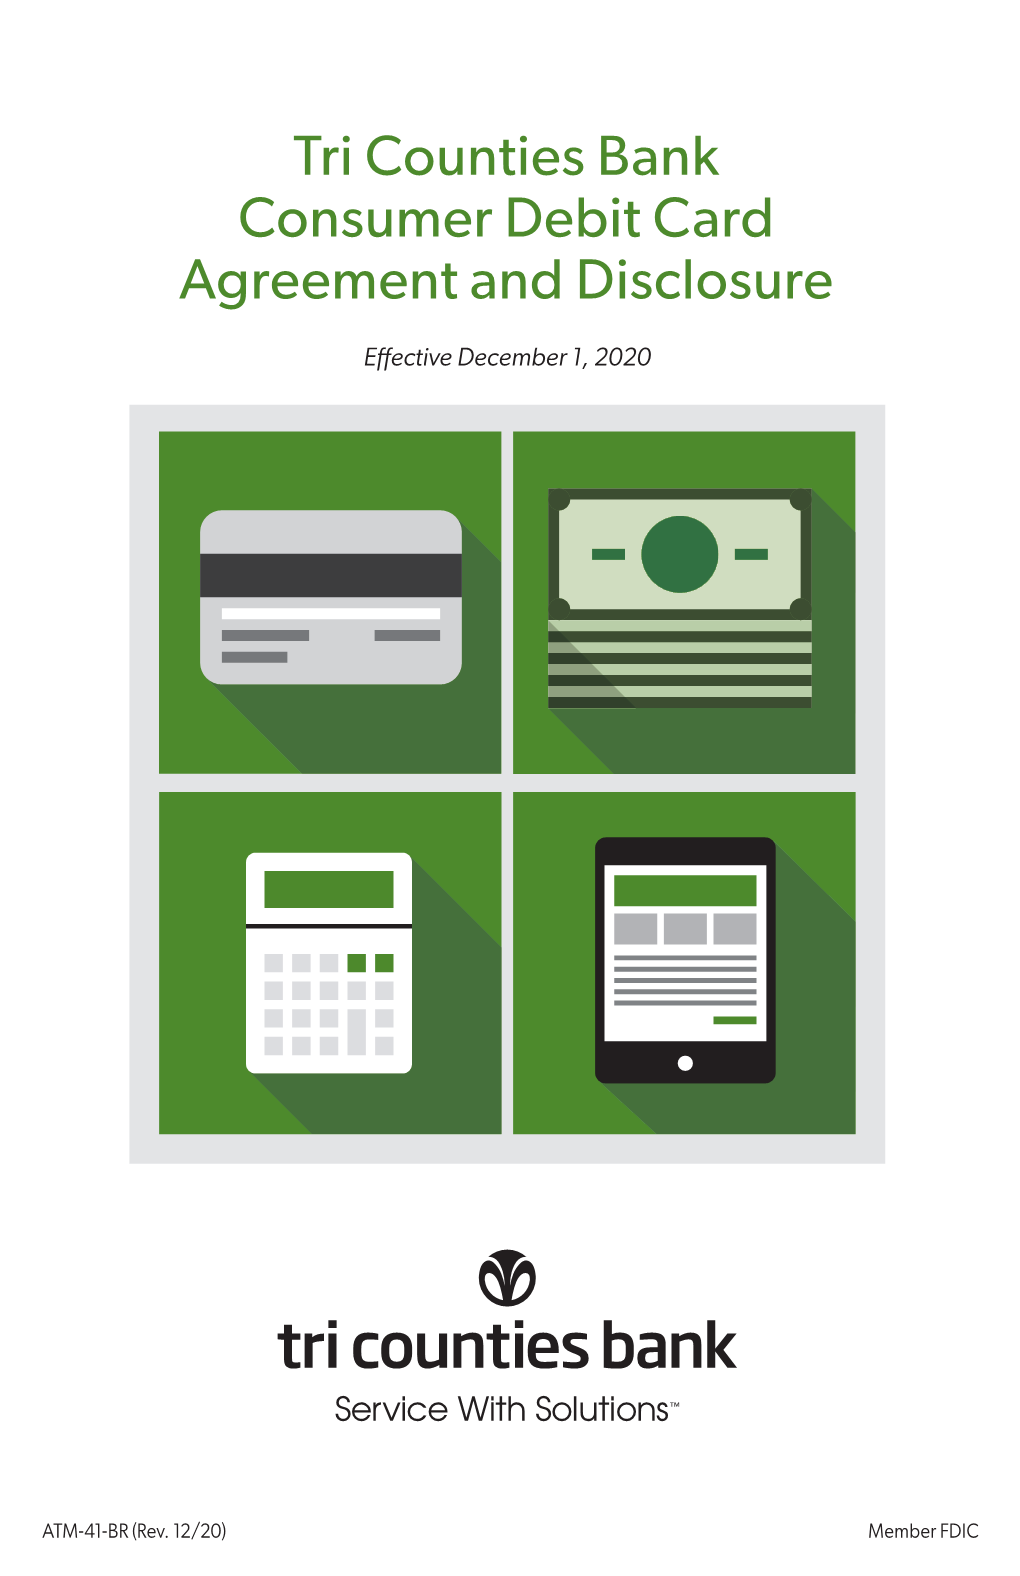 Tri Counties Bank Consumer Debit Card Agreement and Disclosure